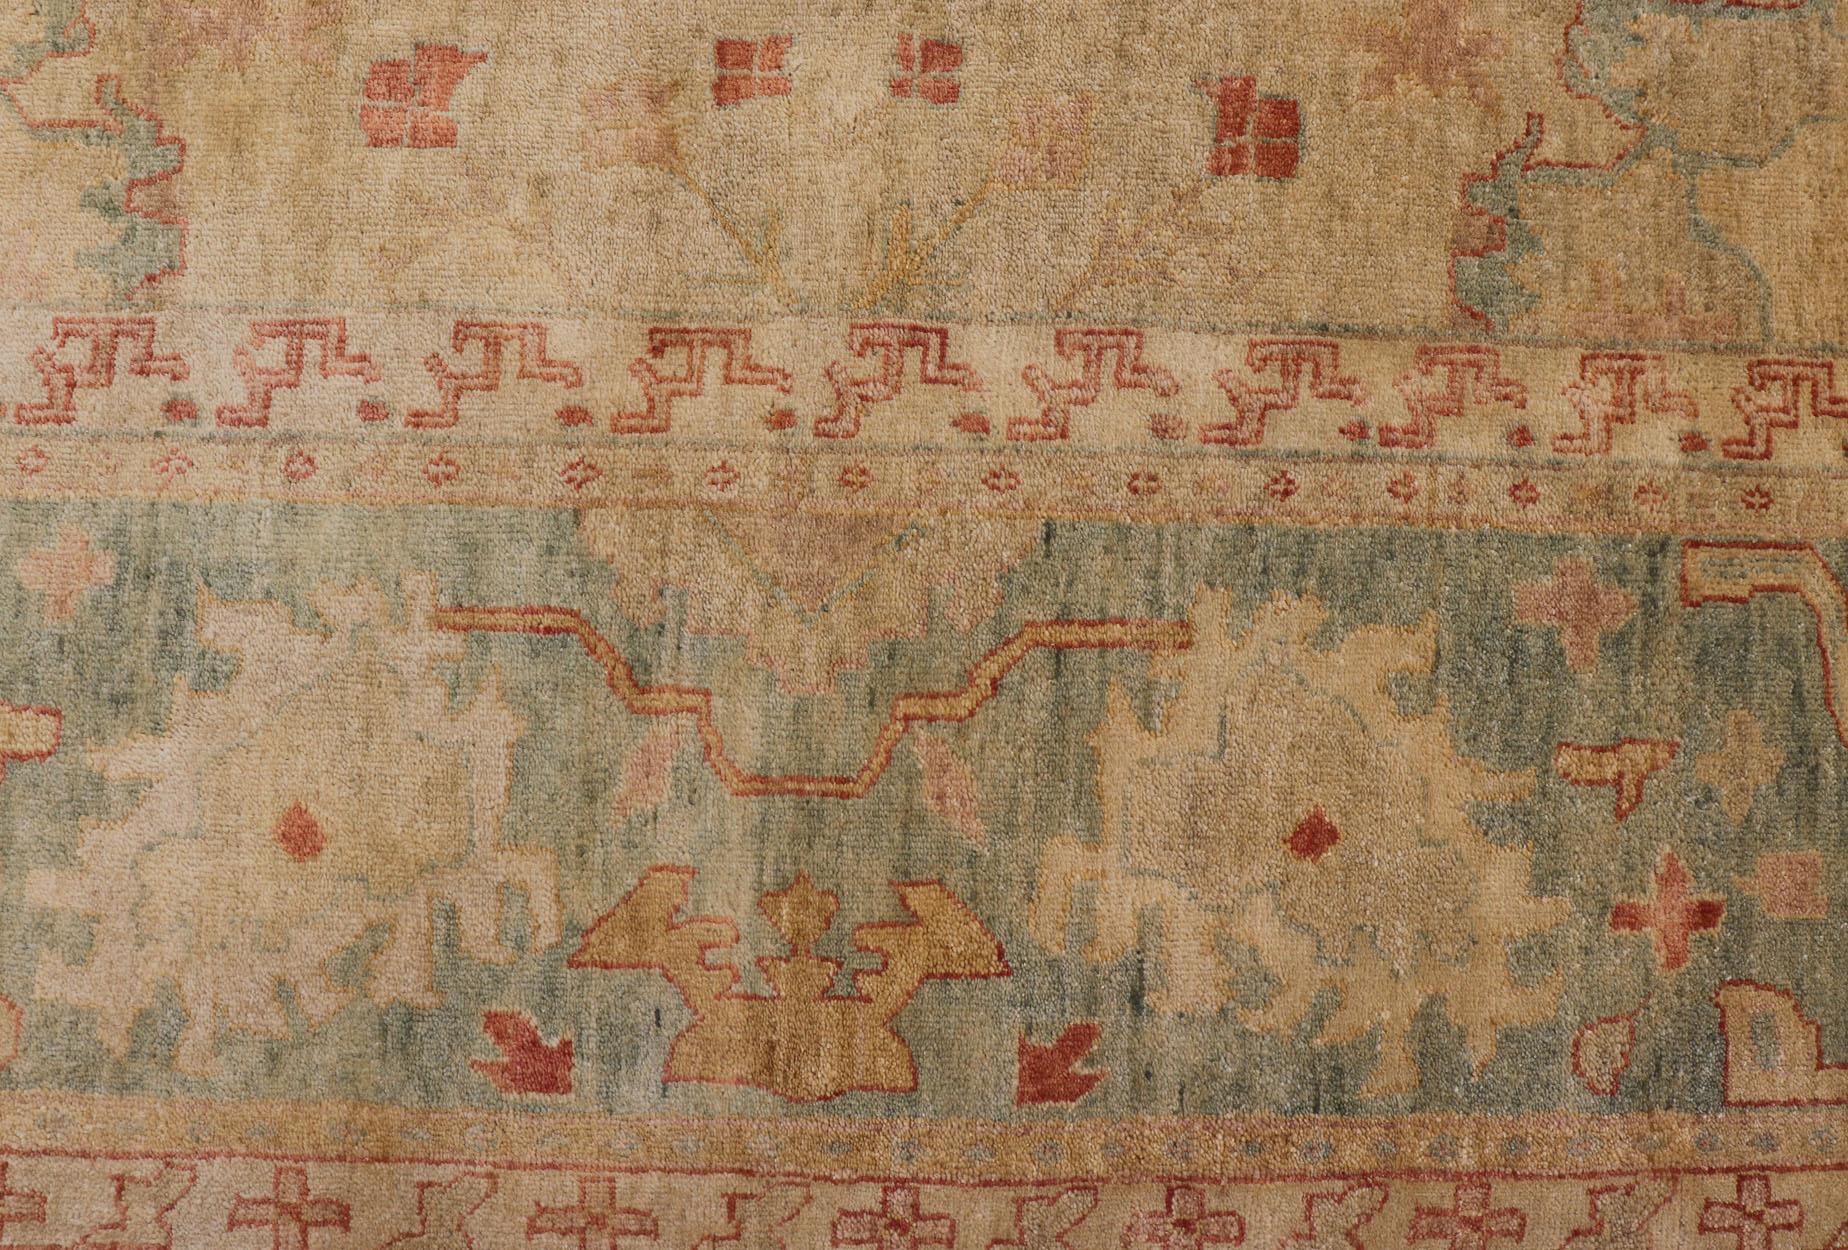 Oversized Hand-Knotted Tribal Diamond Oushak in Tan and Green Tones.
 Measures 10'3 x 14'3
This woven art was hand-knotted in India during the 2010's. This wide banded border is rendered in a blue green, holding a common leaflet repeating design.